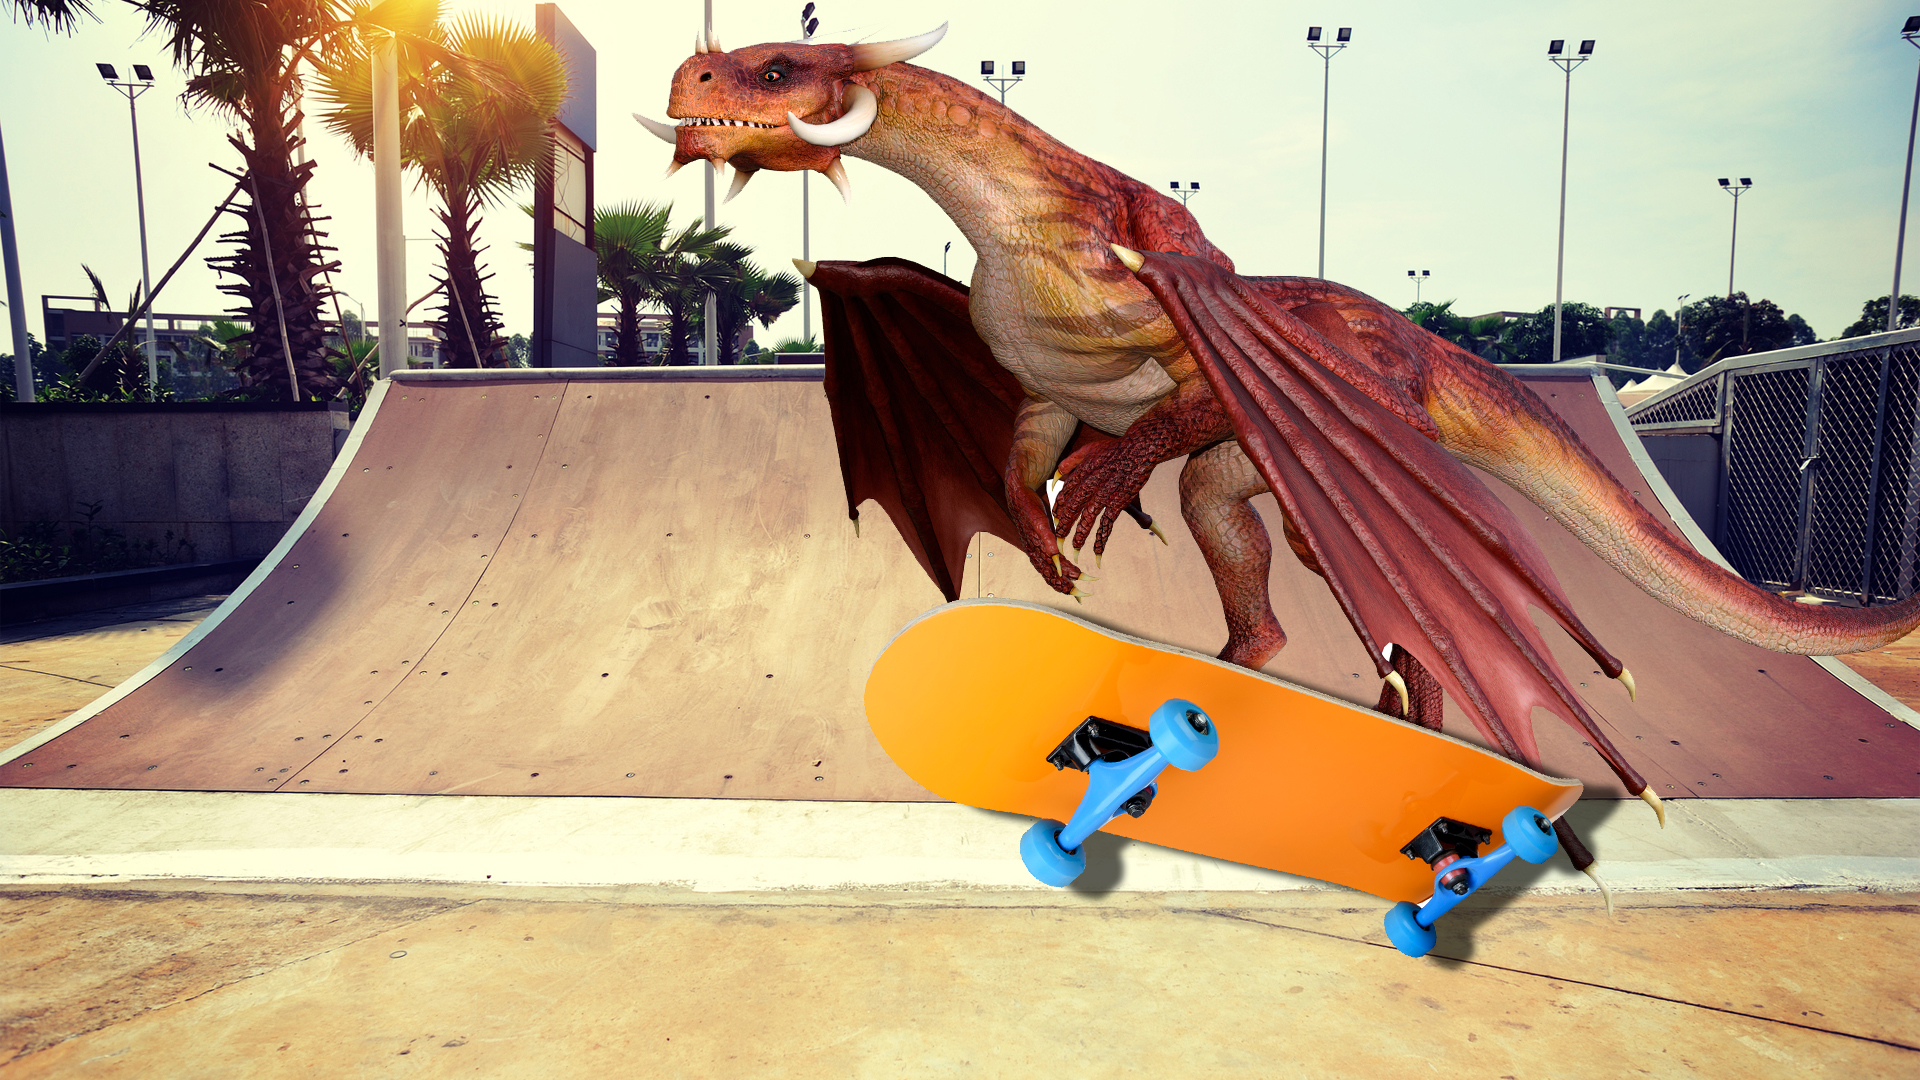 A dragon pulling off a trick on a skateboard ramp